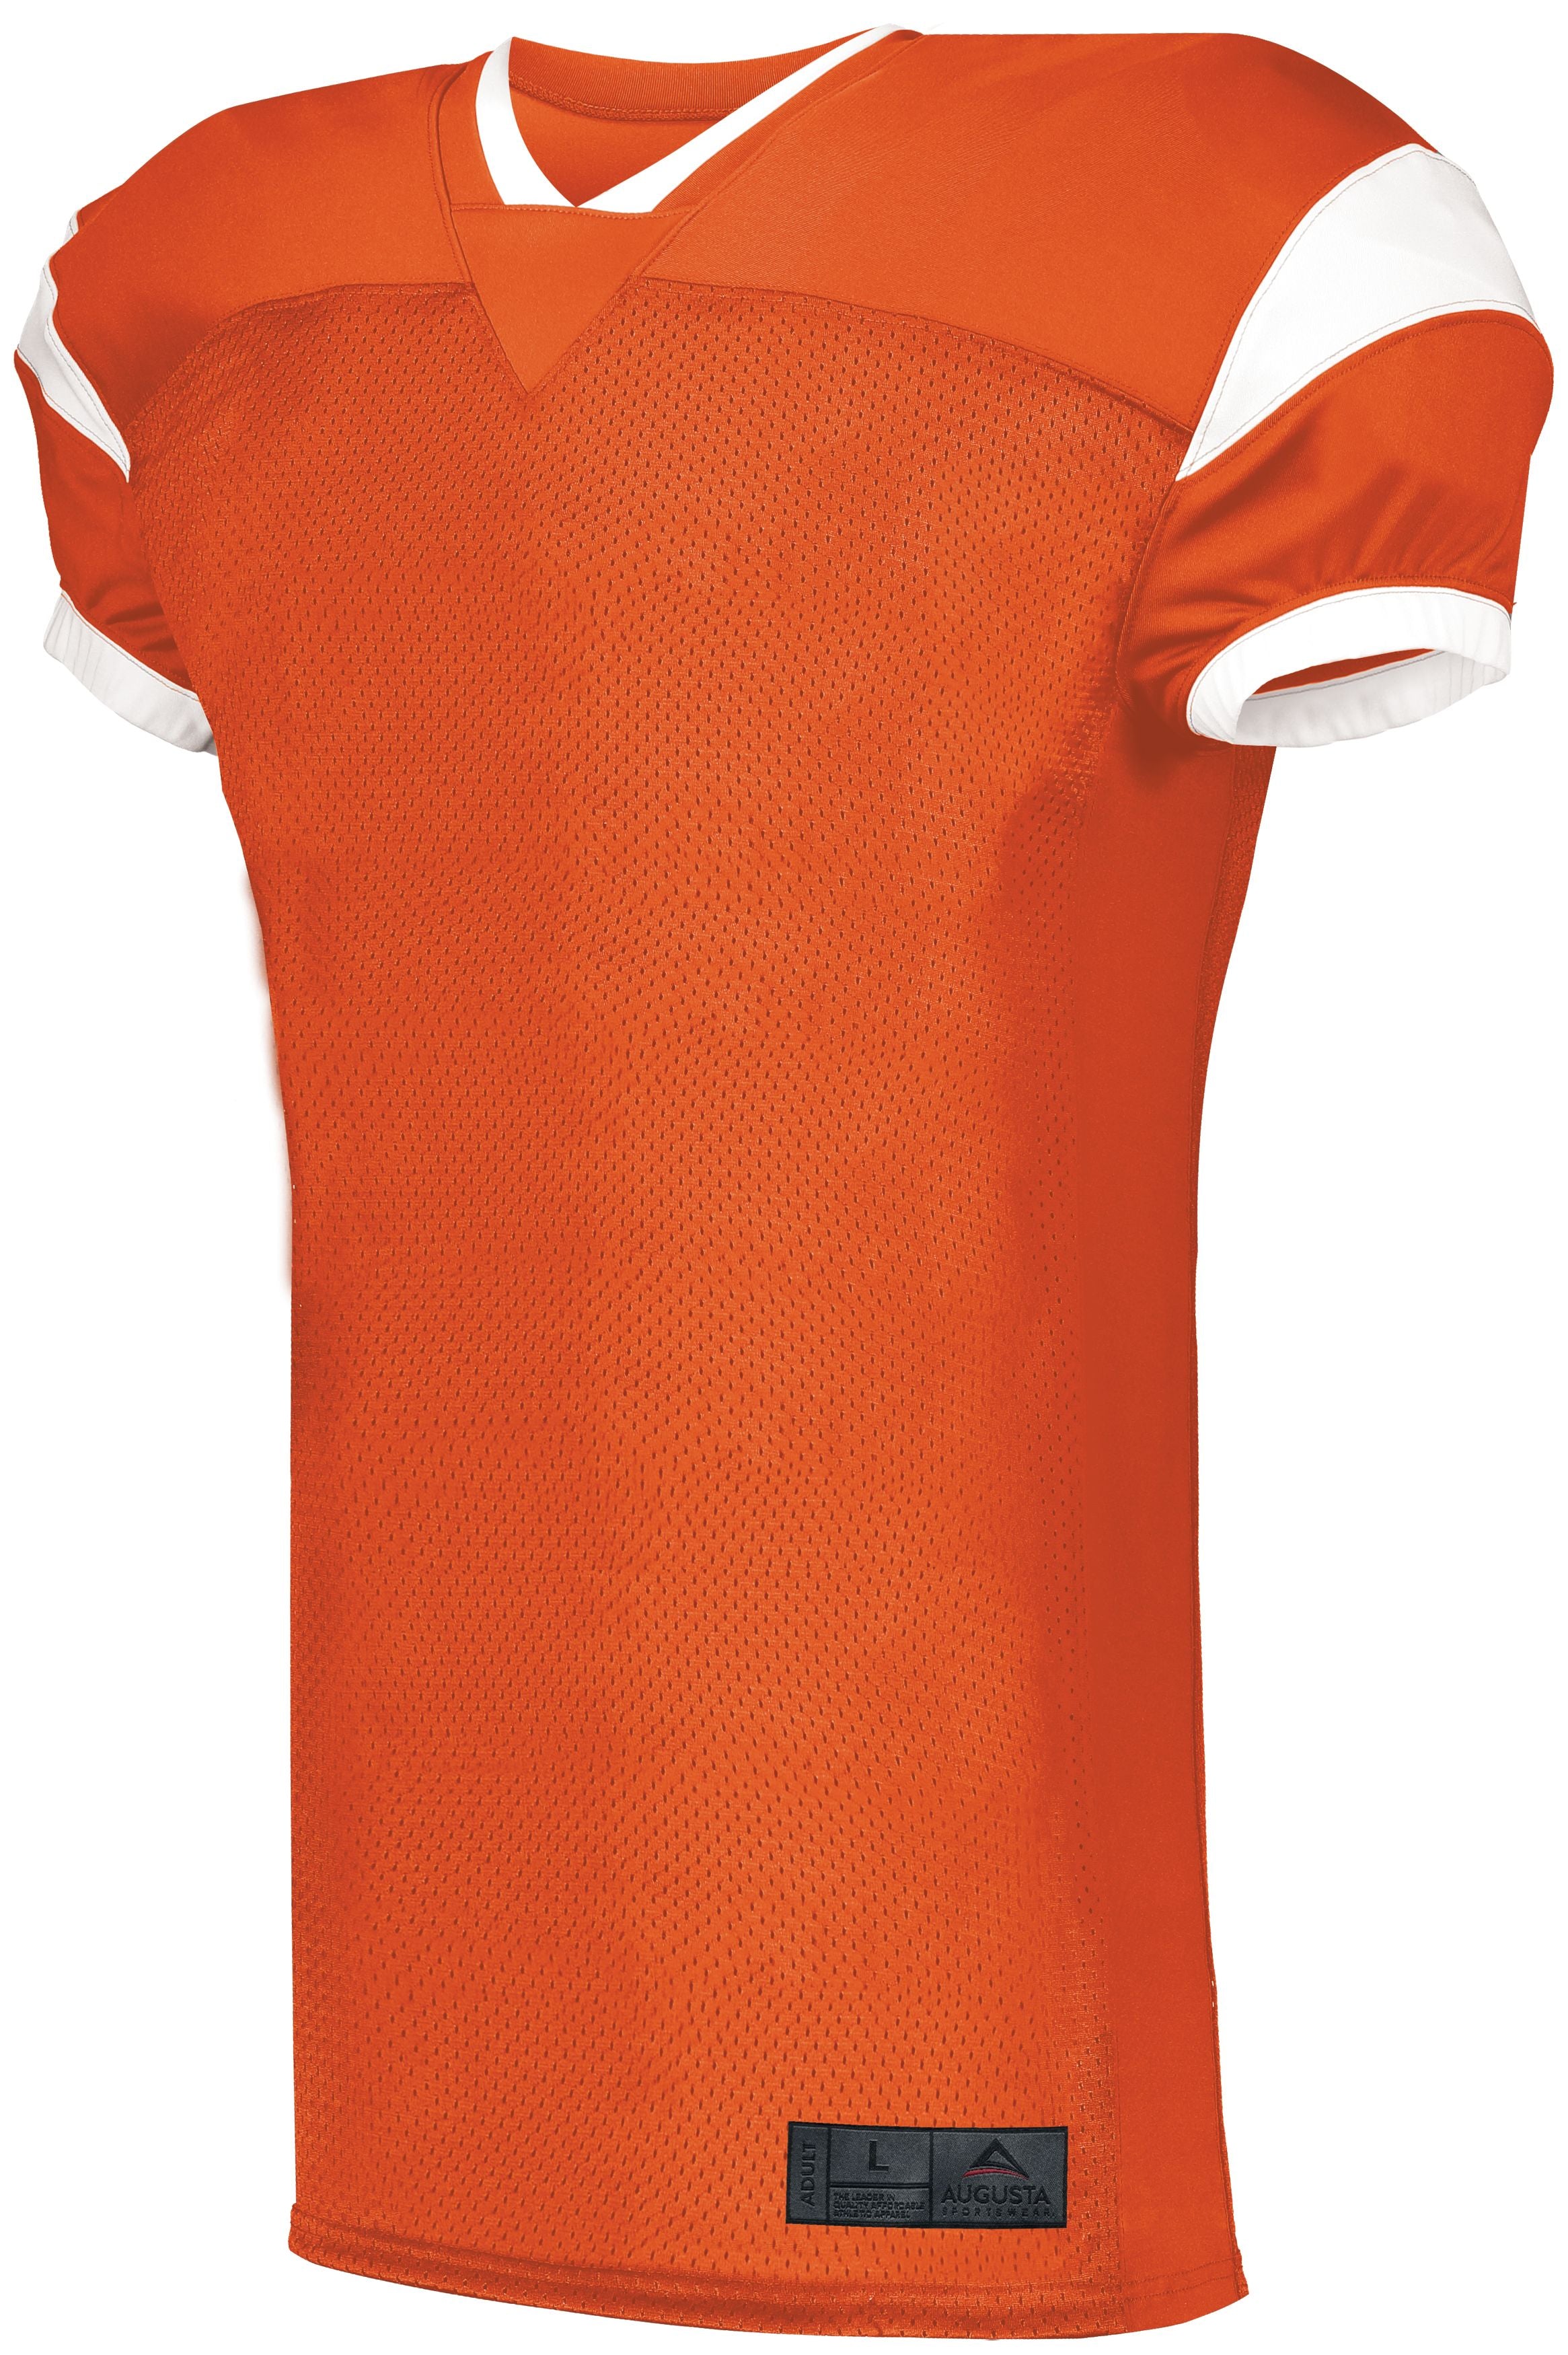 Augusta Sportswear Slant Football Jersey in Orange/White  -Part of the Adult, Adult-Jersey, Augusta-Products, Football, Shirts, All-Sports, All-Sports-1 product lines at KanaleyCreations.com